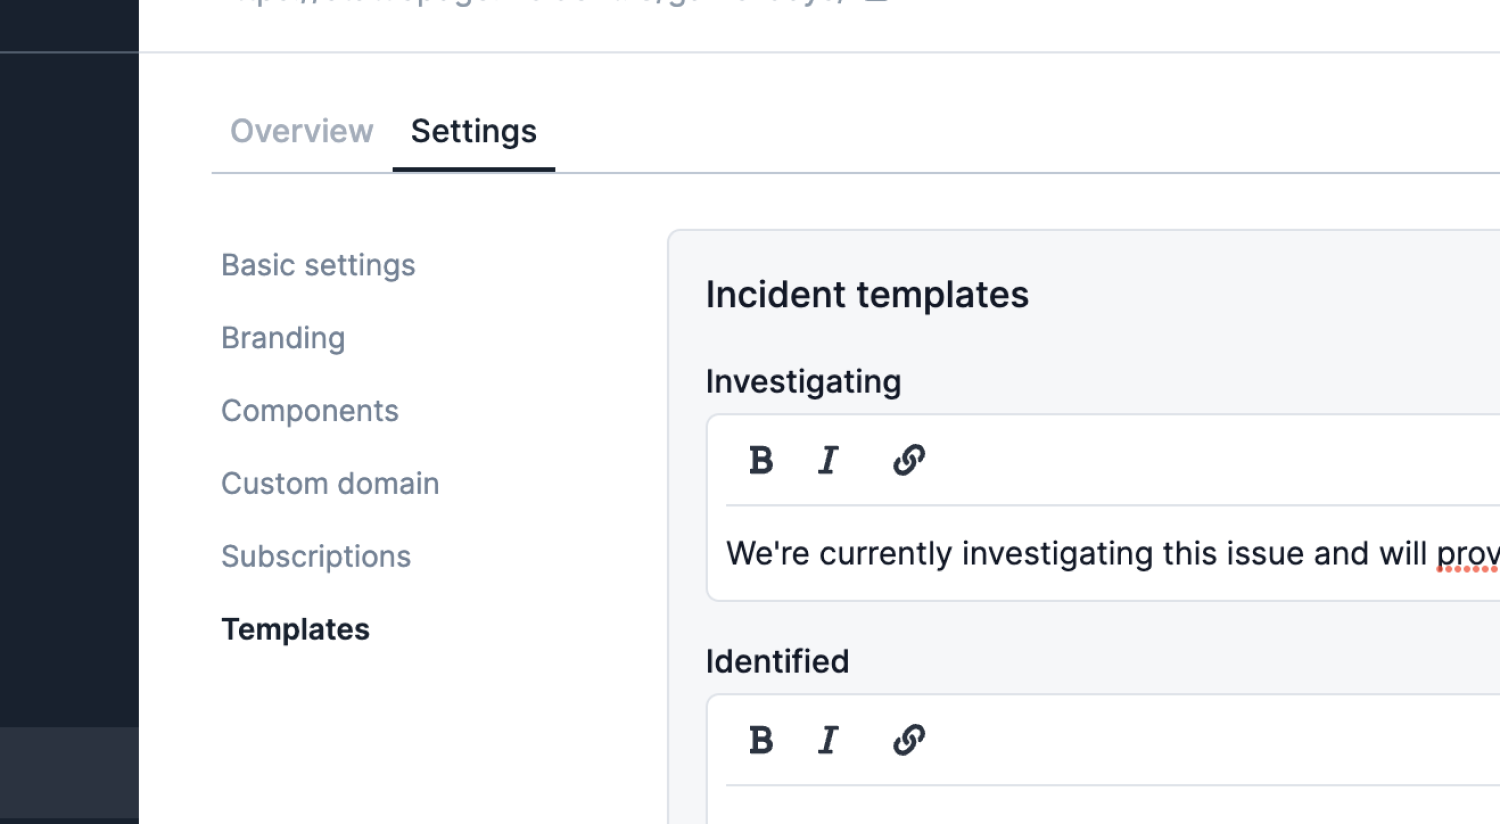 Creating a status page template in the incident.io dashboard